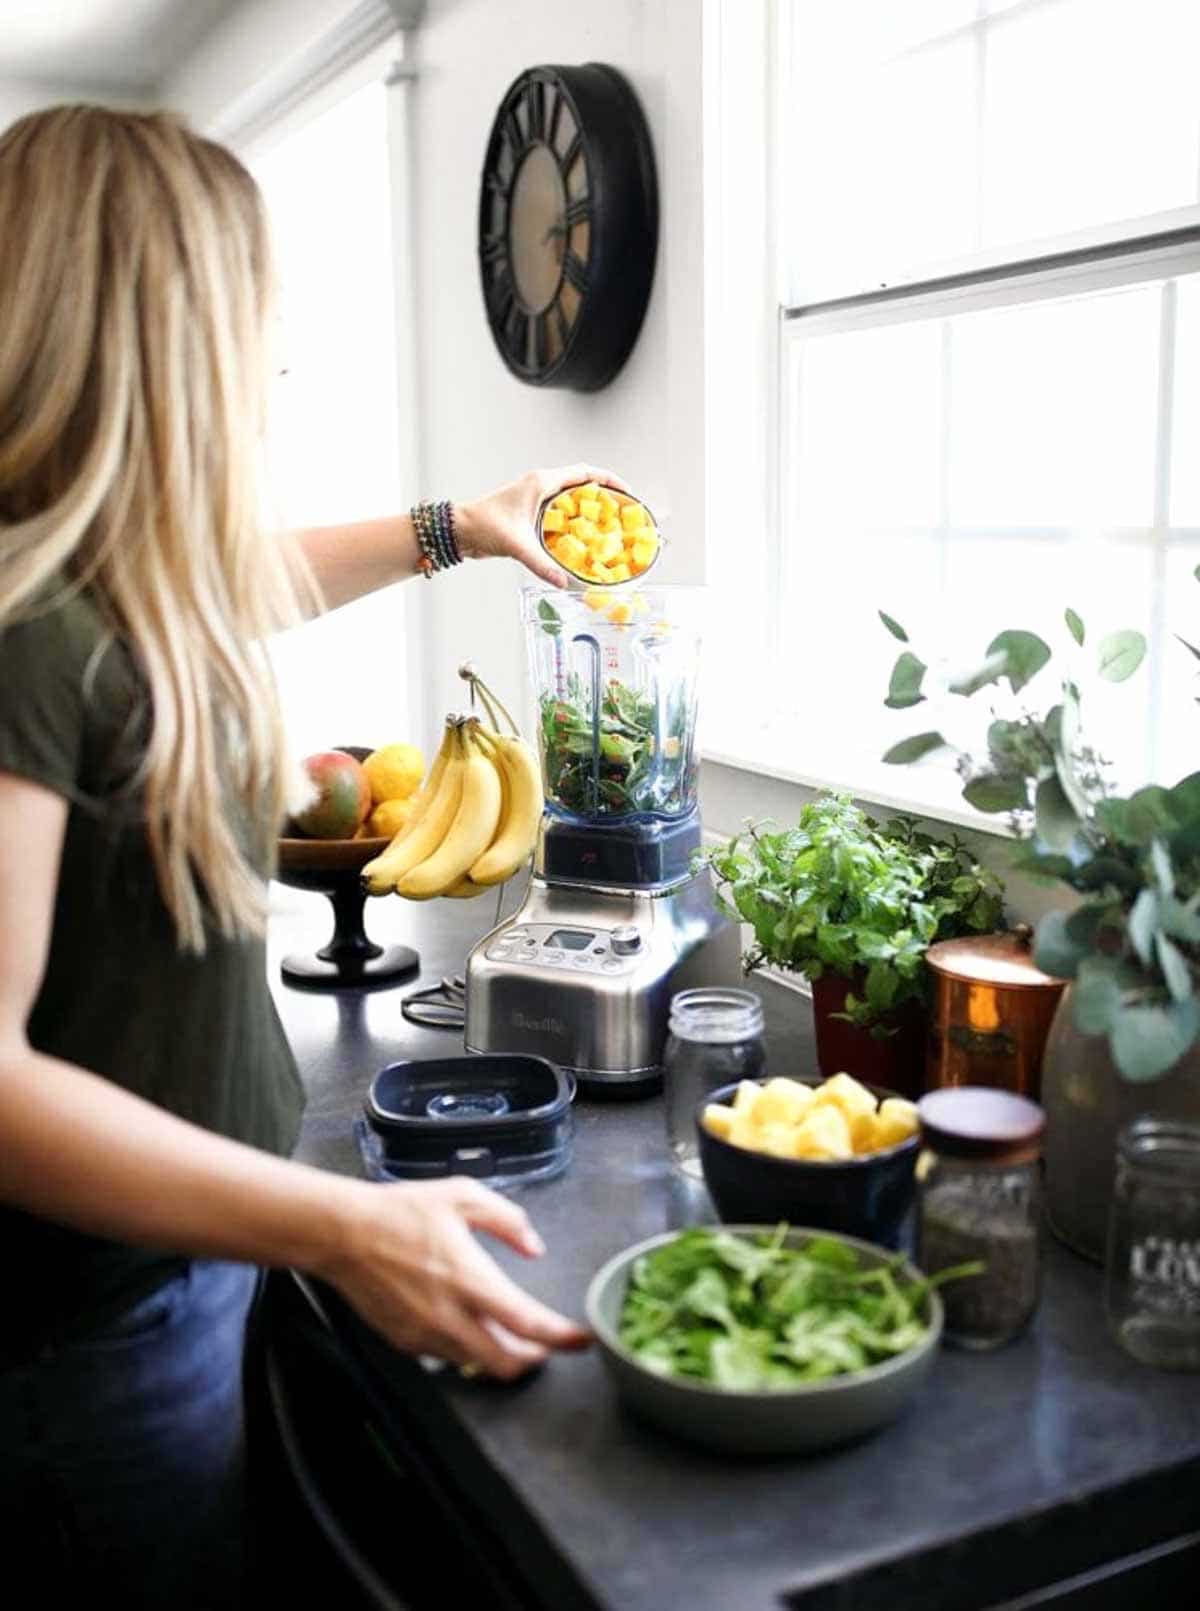 white woman with blond hair pouring chunks of pineapple into a blender to make a breakfast smoothie.